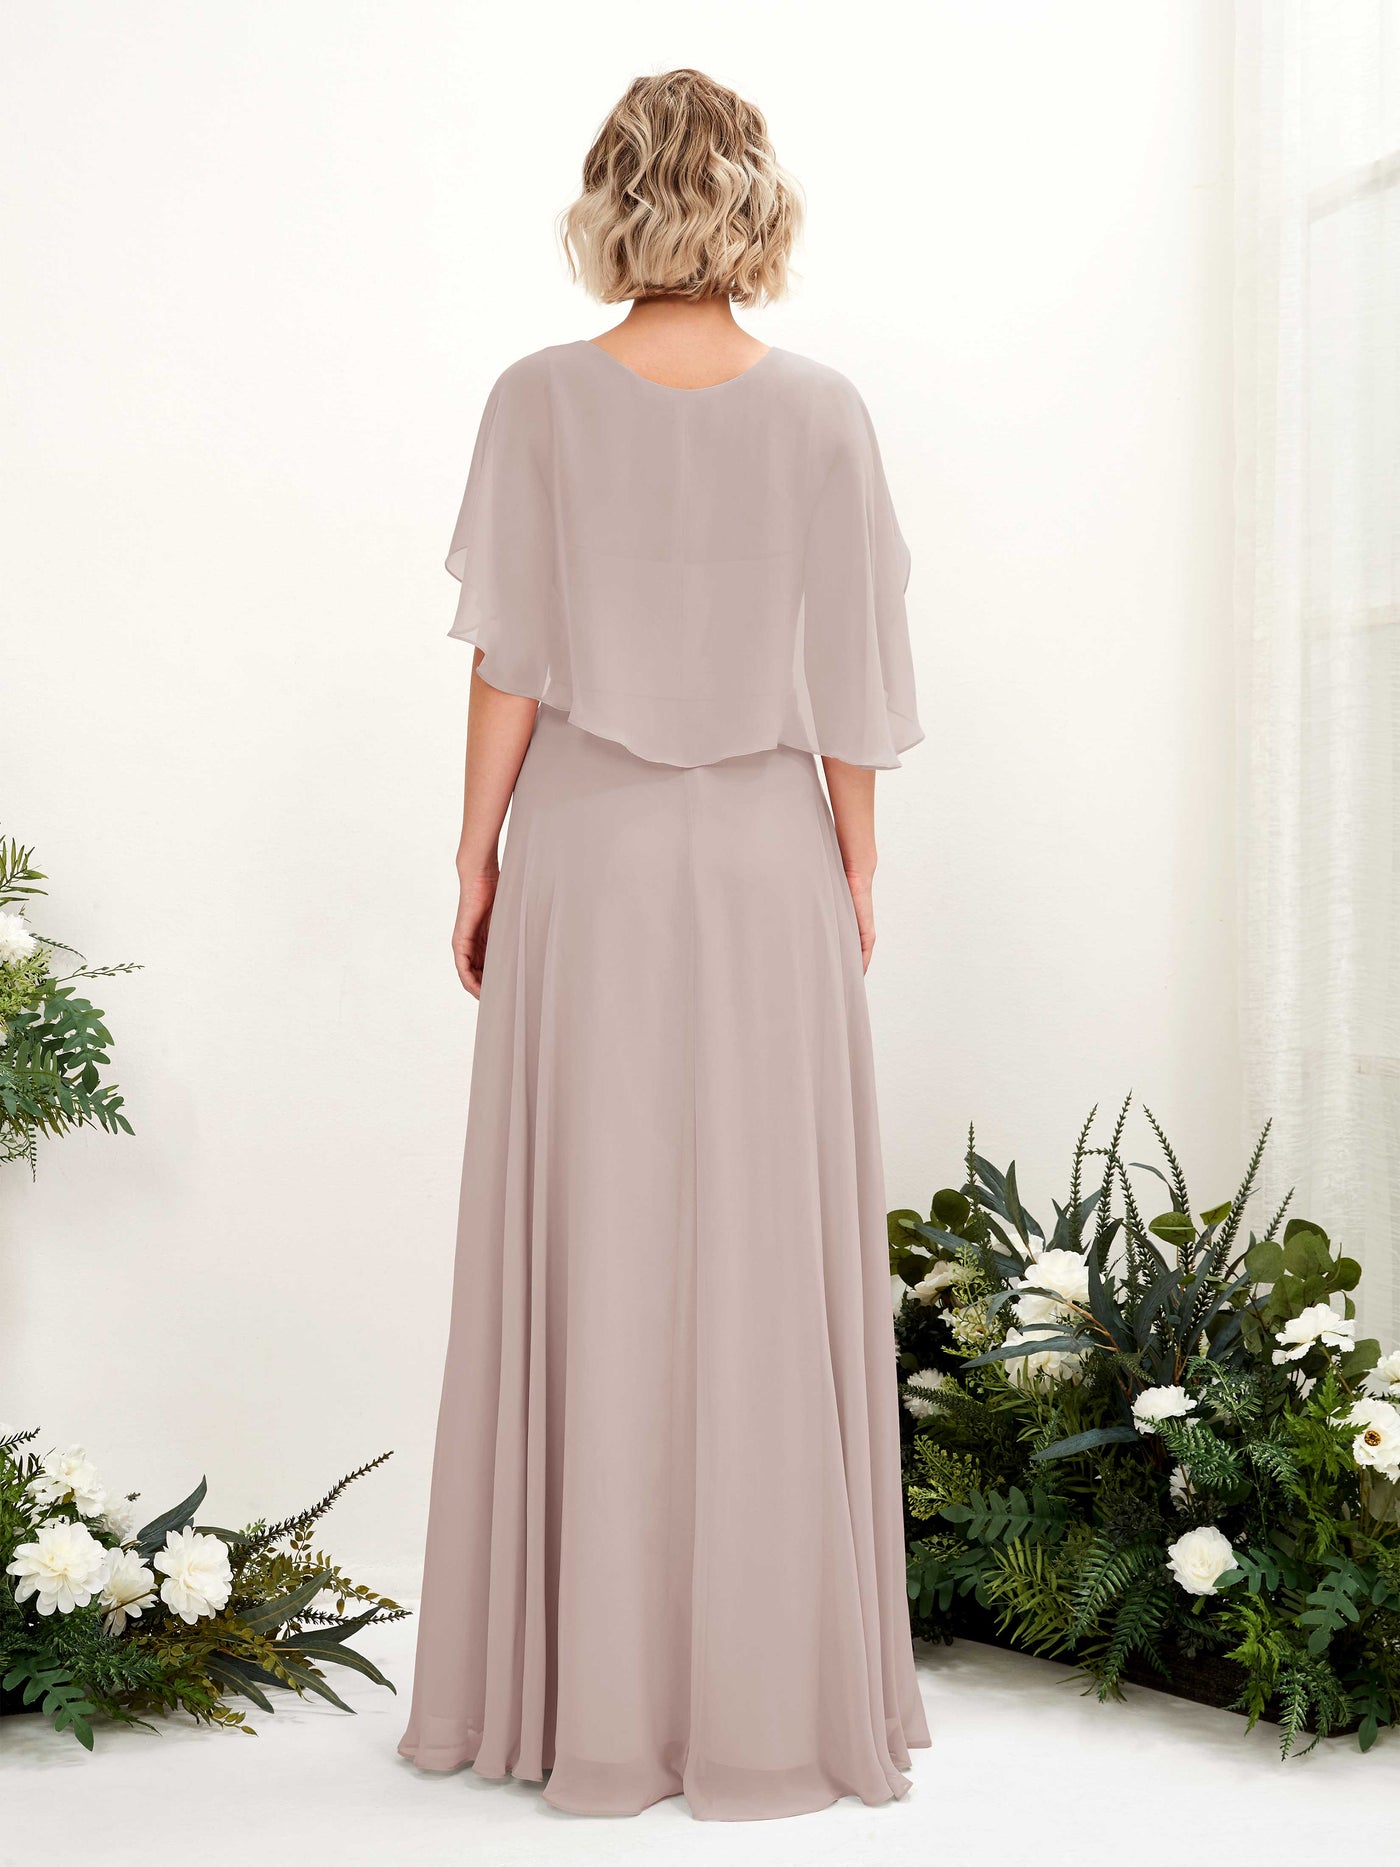 Taupe Bridesmaid Dresses Bridesmaid Dress A-line Chiffon V-neck Full Length Short Sleeves Wedding Party Dress (81224424)#color_taupe